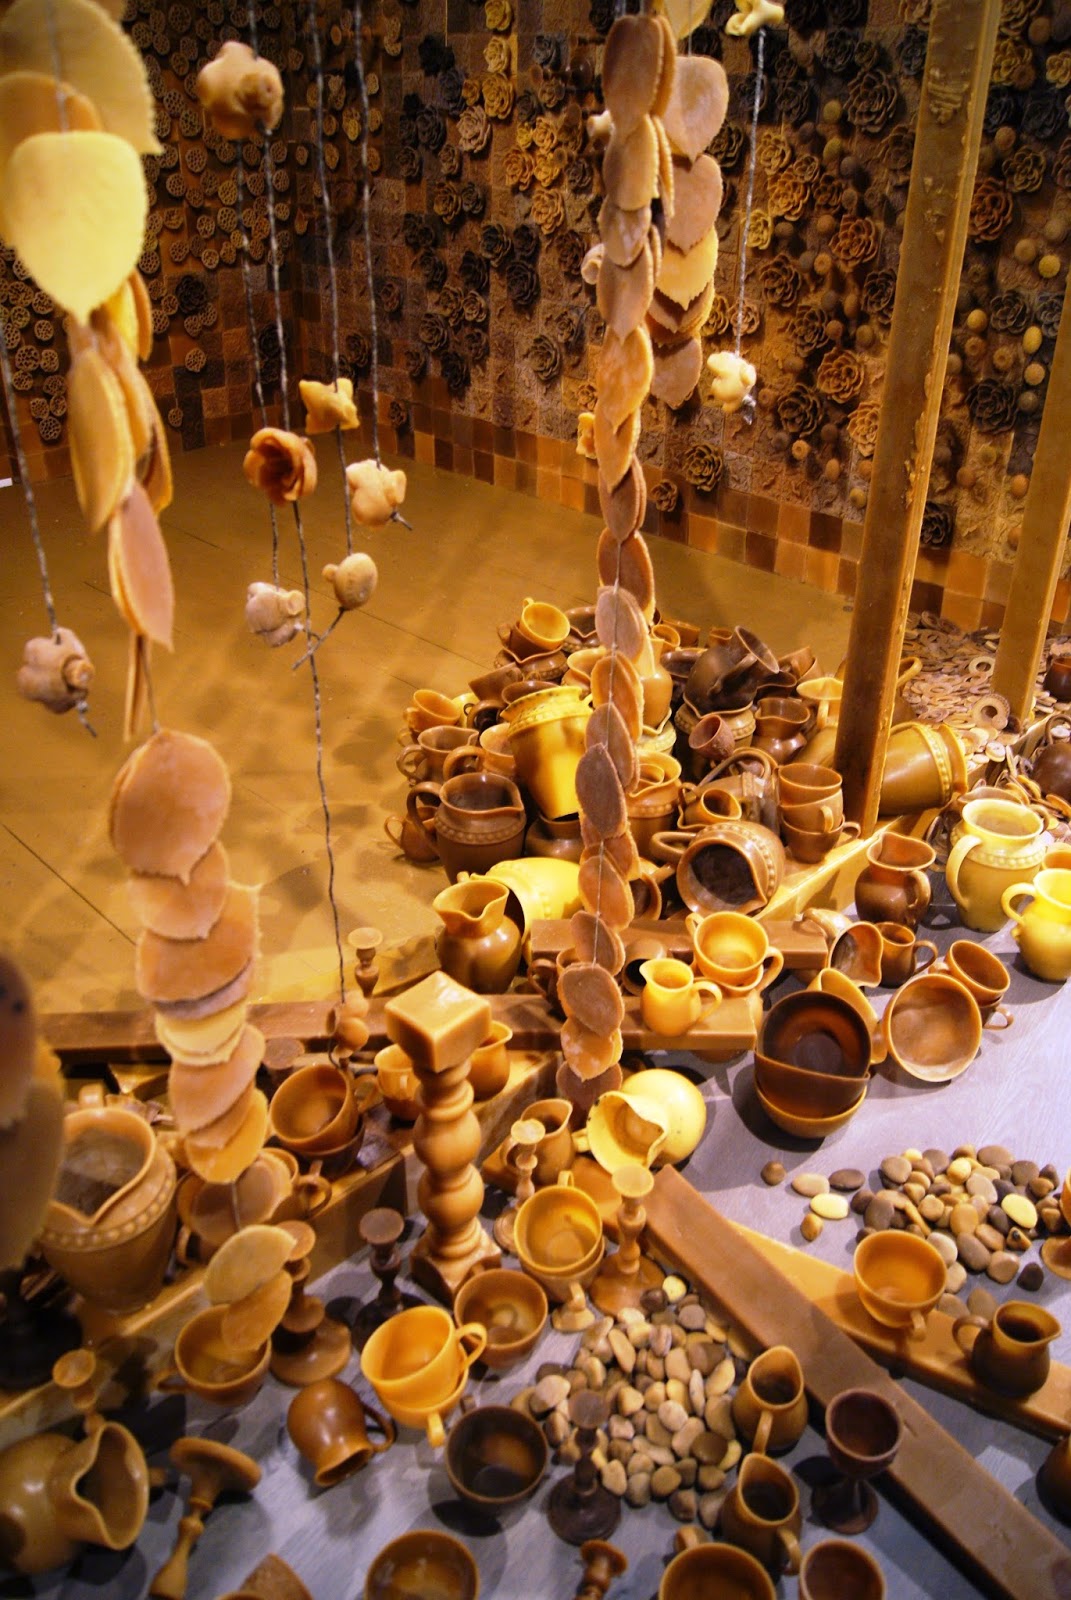 Vanitas Beeswax Art Installation by Penelope Stewart. at Koffler Gallery in Artscape Youngplace, Toronto, Culture, Exhibit, Exhibition, Bees, Beehive, Stiil life, Ontario, Canada, Melanie_ps, The Purple Scarf